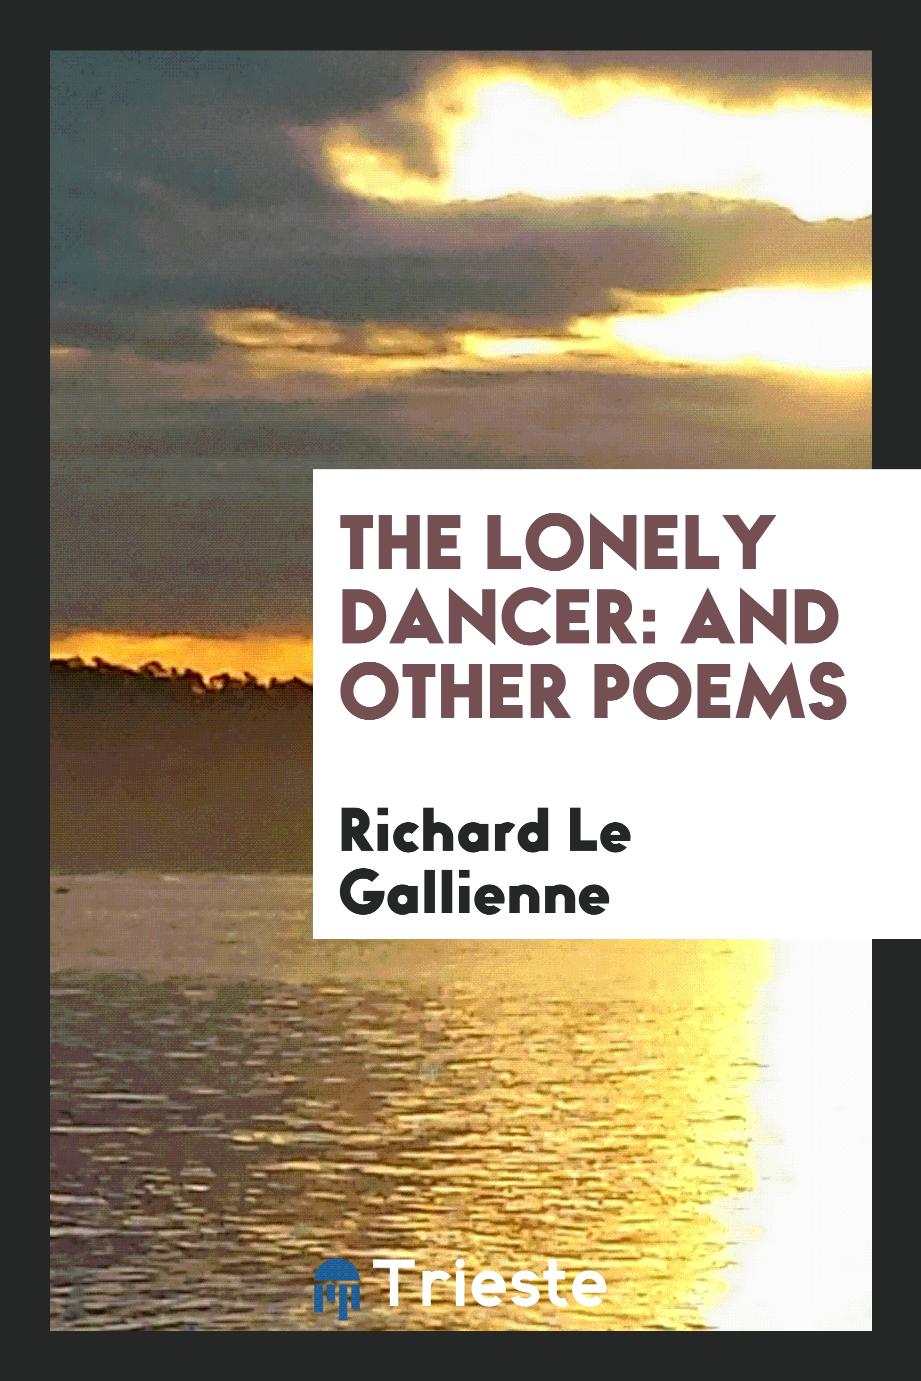 The Lonely Dancer: And Other Poems